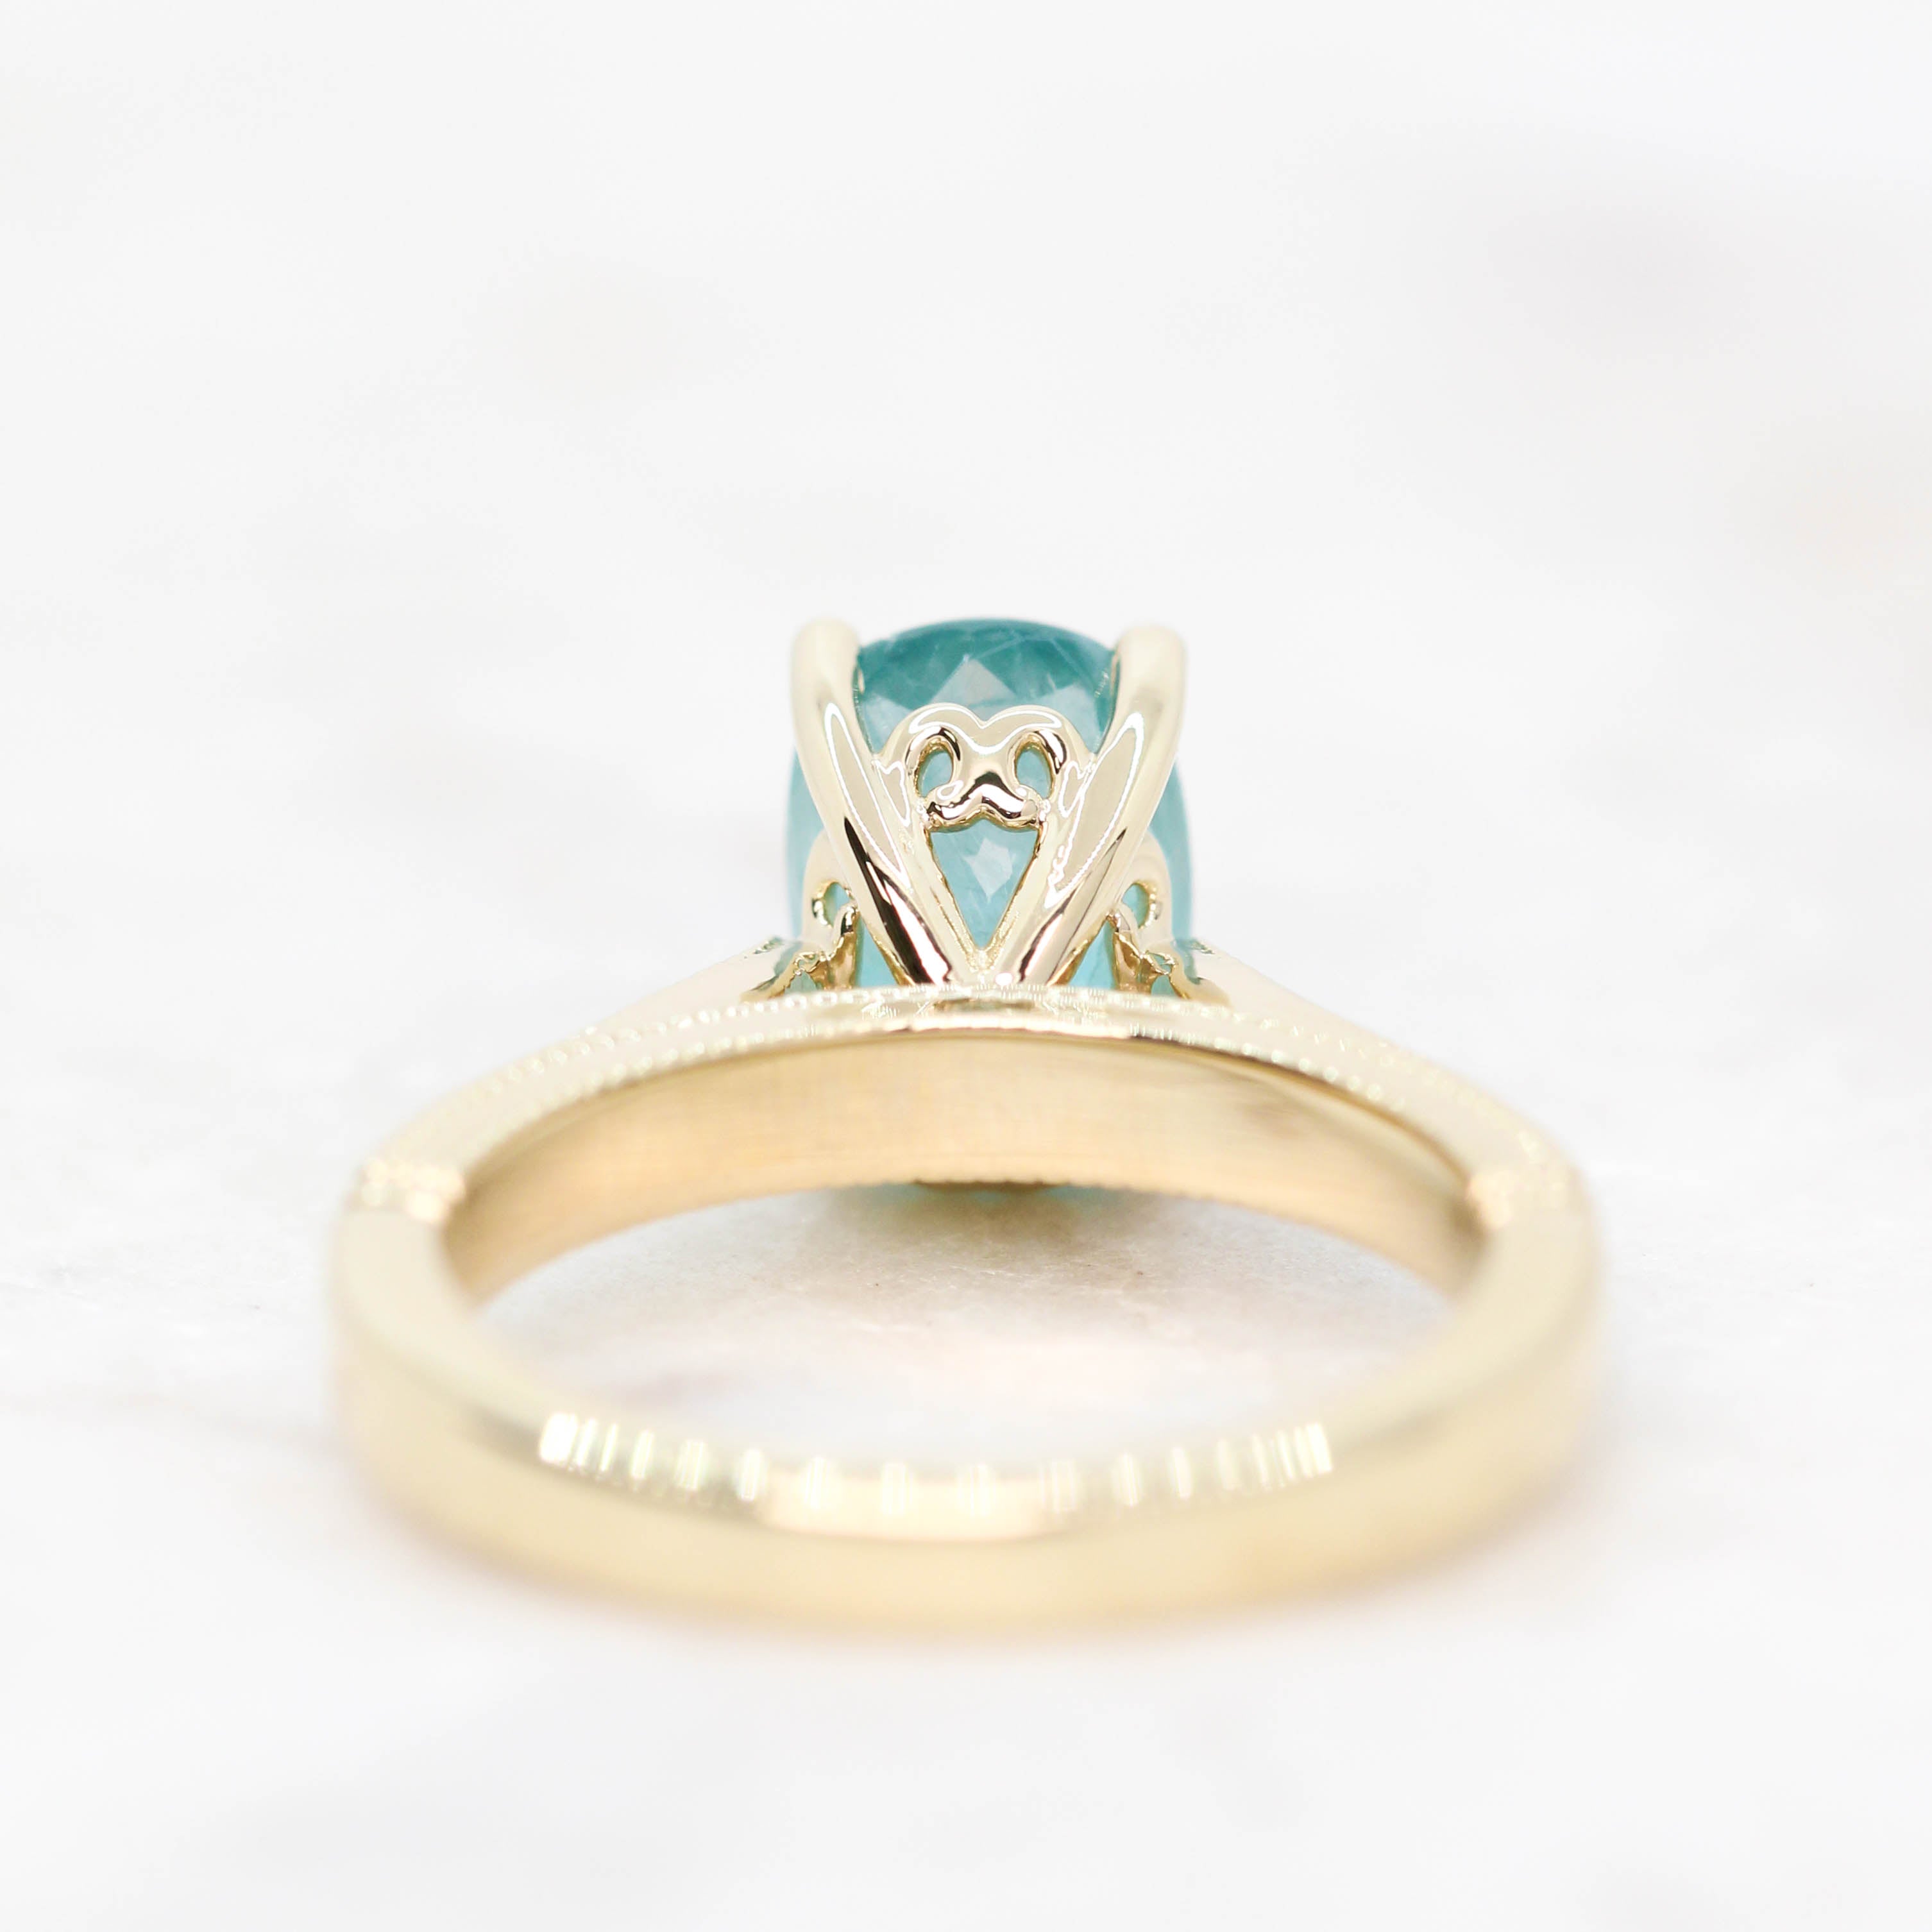 Jane Ring with a 3.22 Carat Teal Oval Grandidierite in 14k Yellow Gold - Ready to Size and Ship - Midwinter Co. Alternative Bridal Rings and Modern Fine Jewelry